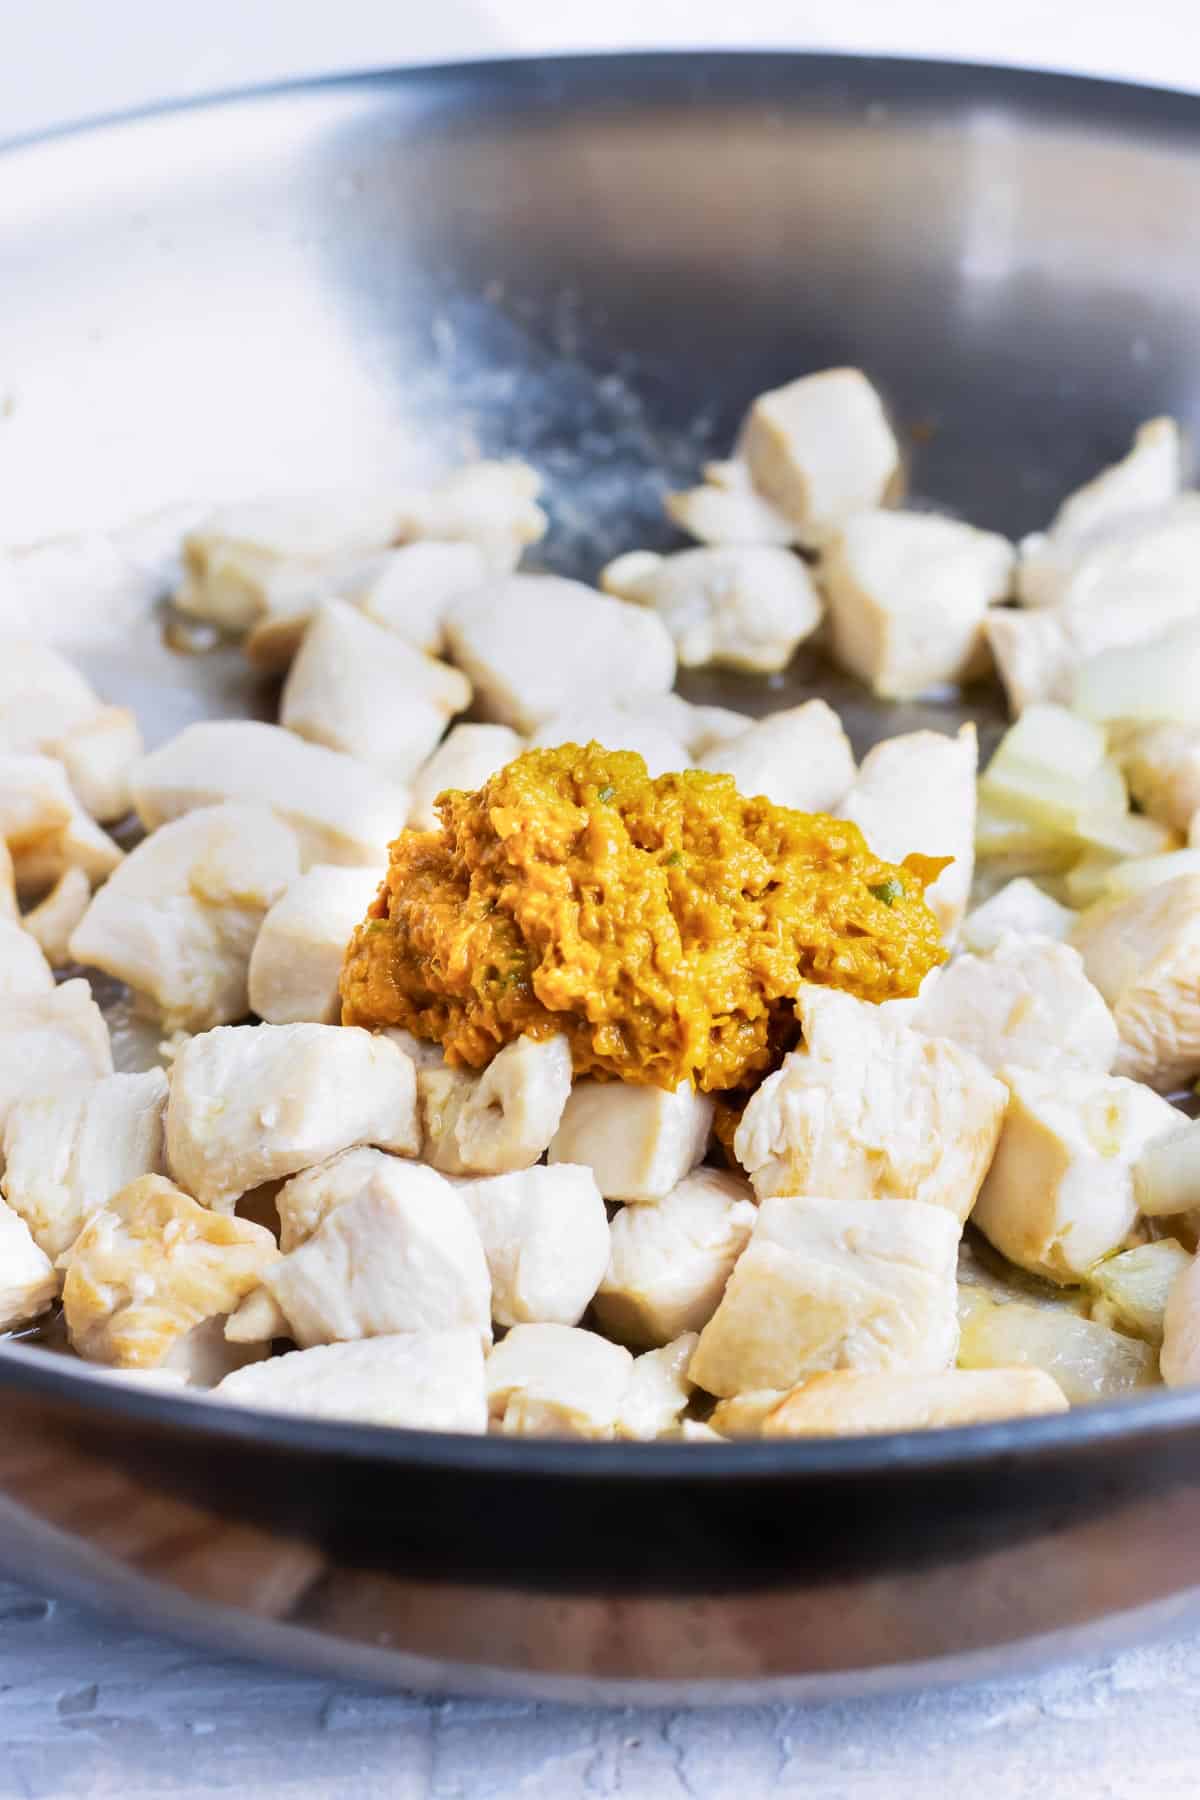 Yellow curry paste is added to cooked chicken cubes.